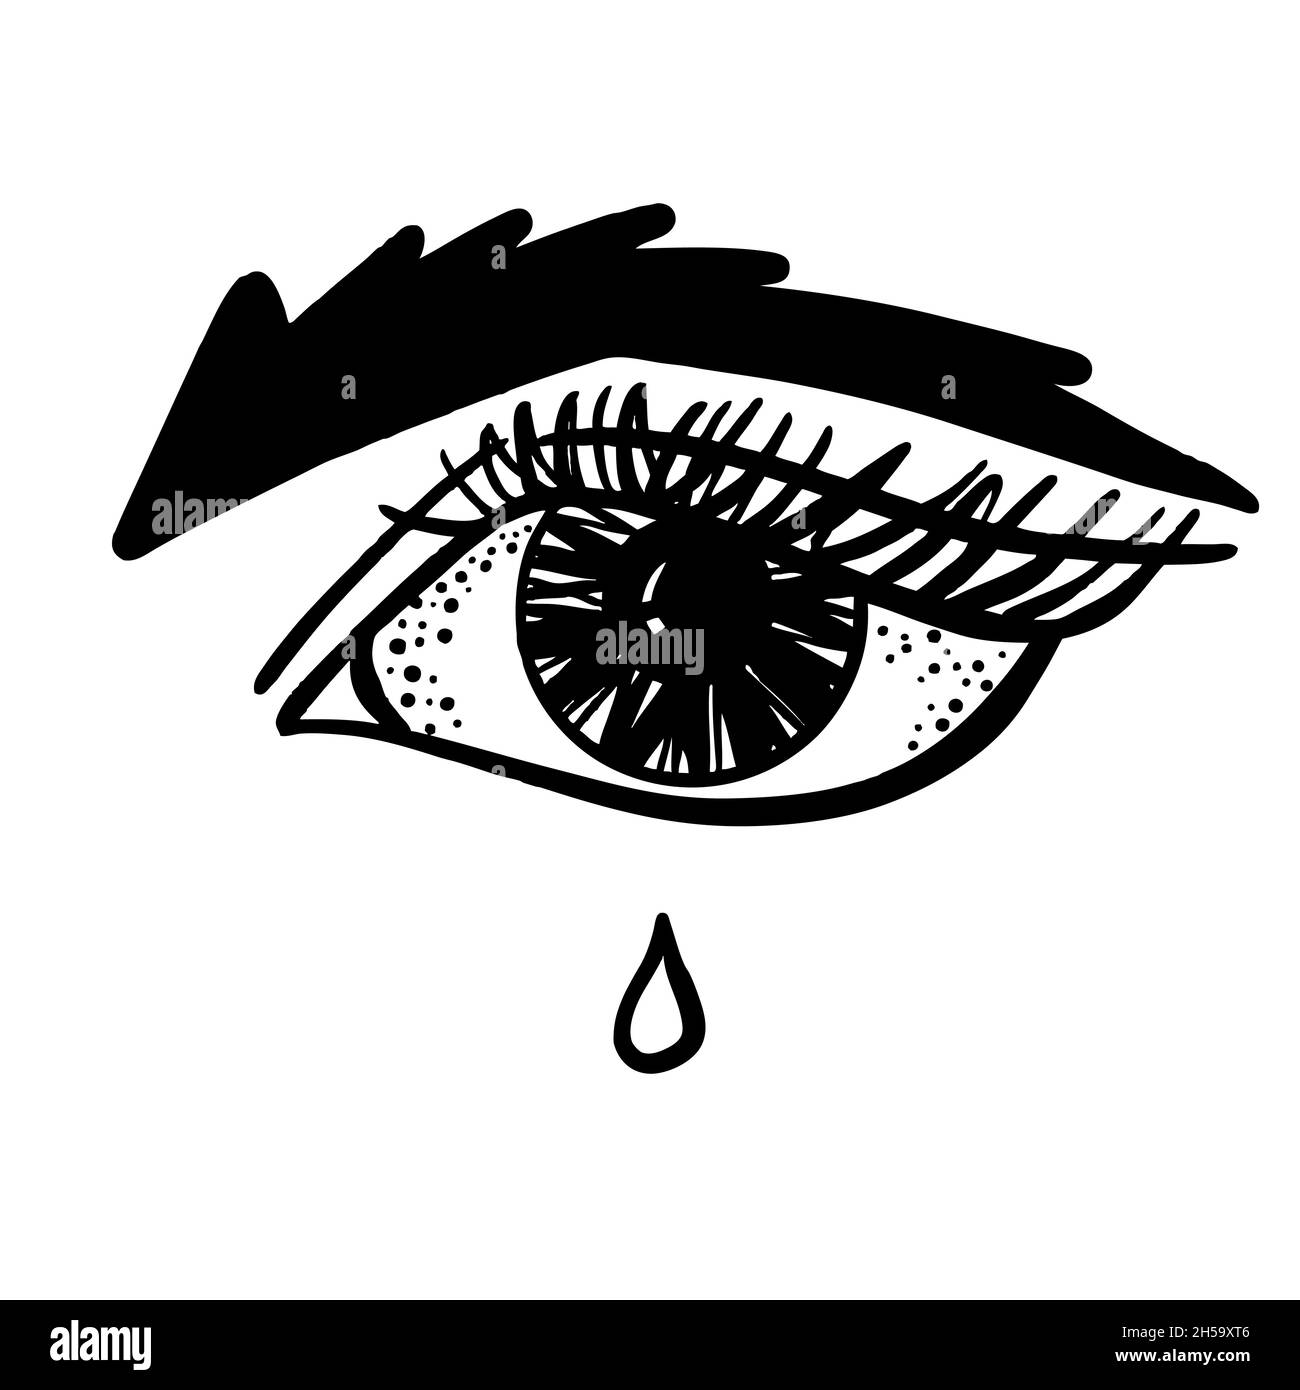 Female eye with eyelashes and eyebrows, black and white vector sketch Stock Vector